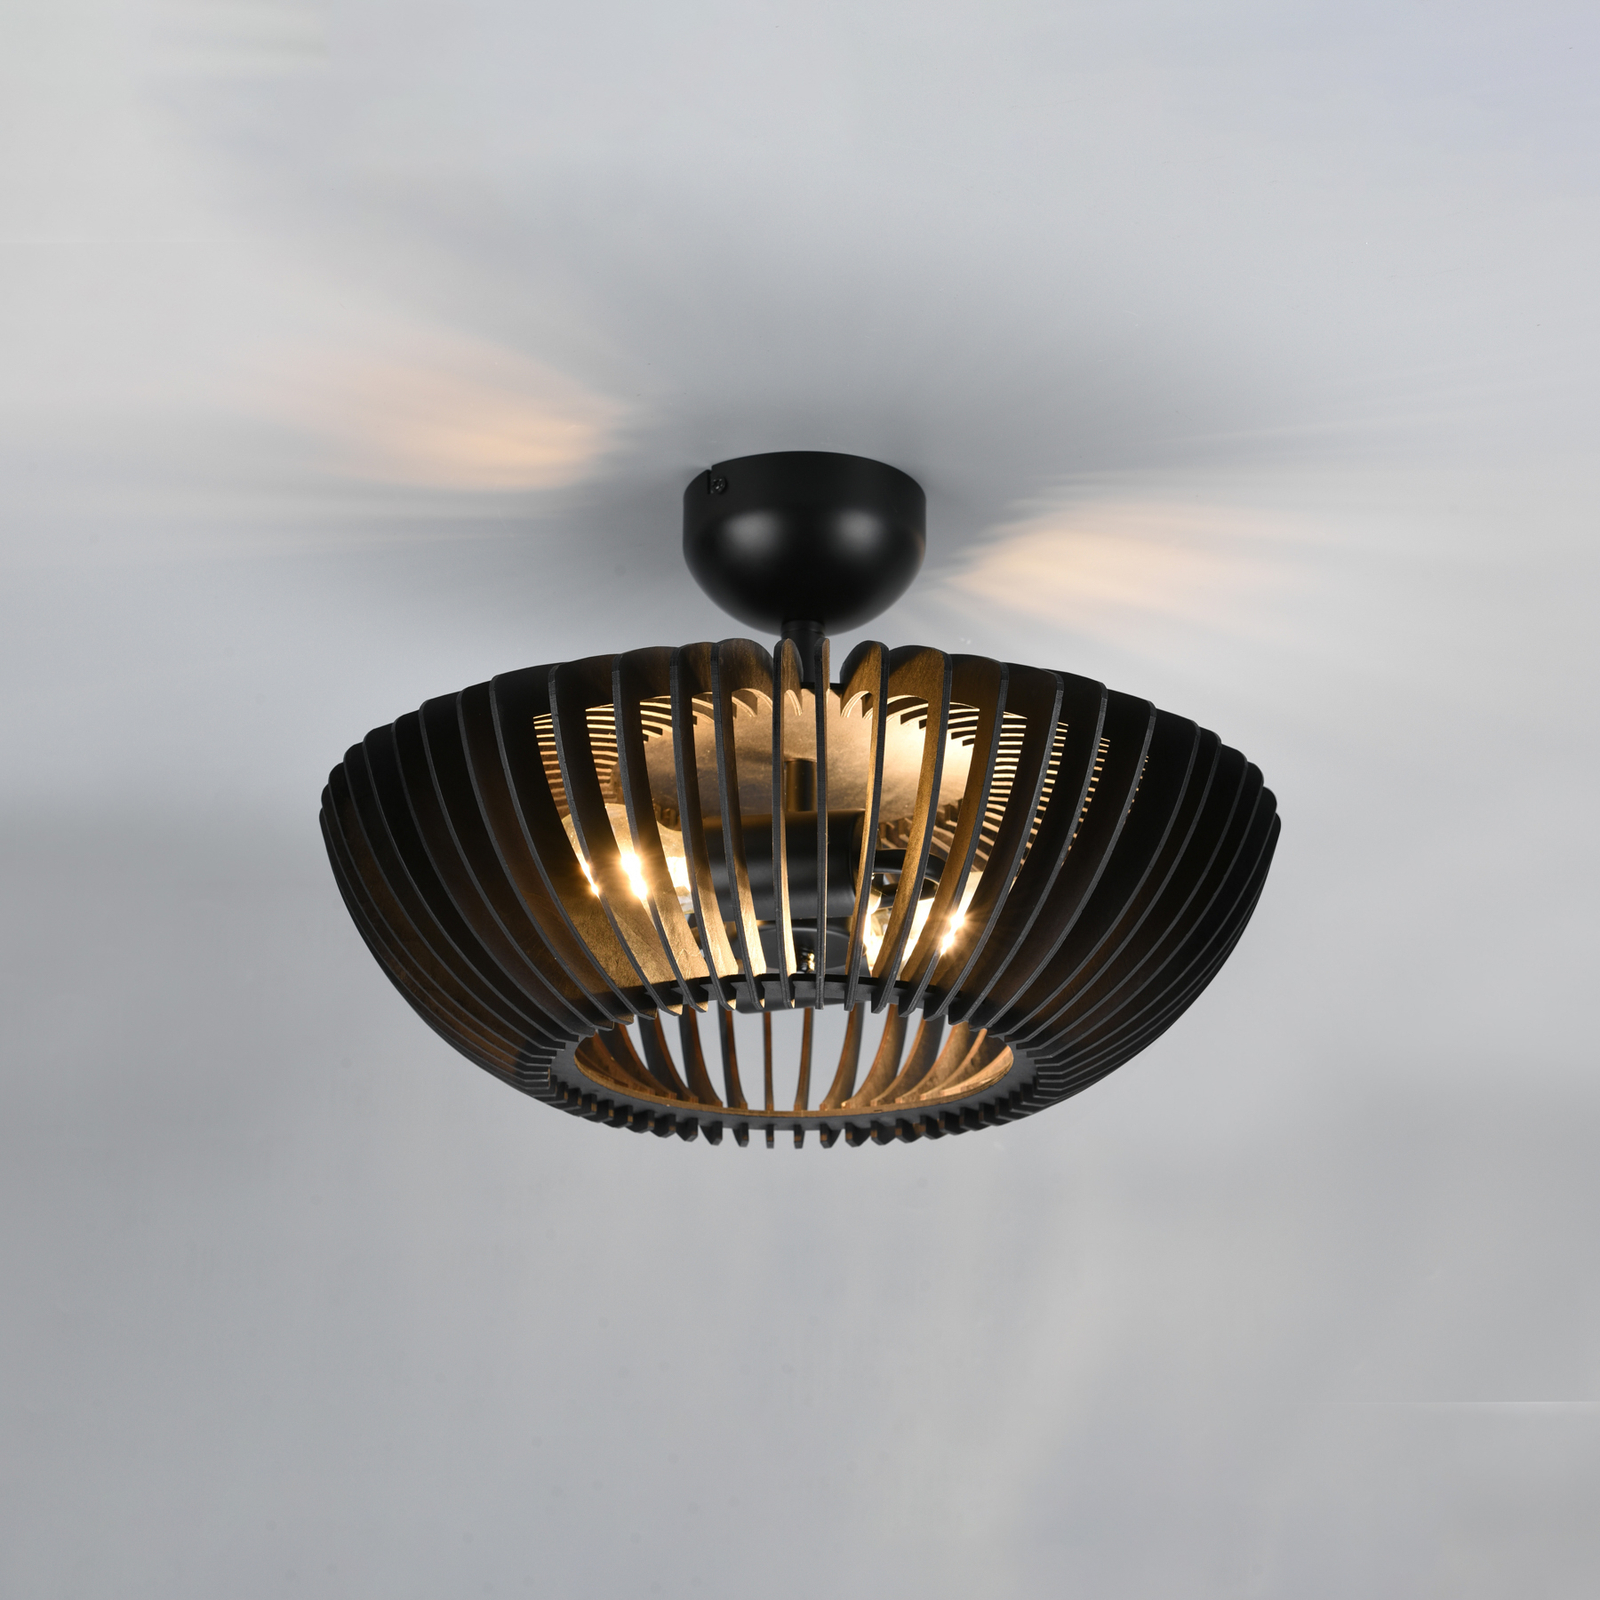 Colino ceiling lamp made of wooden slats, black